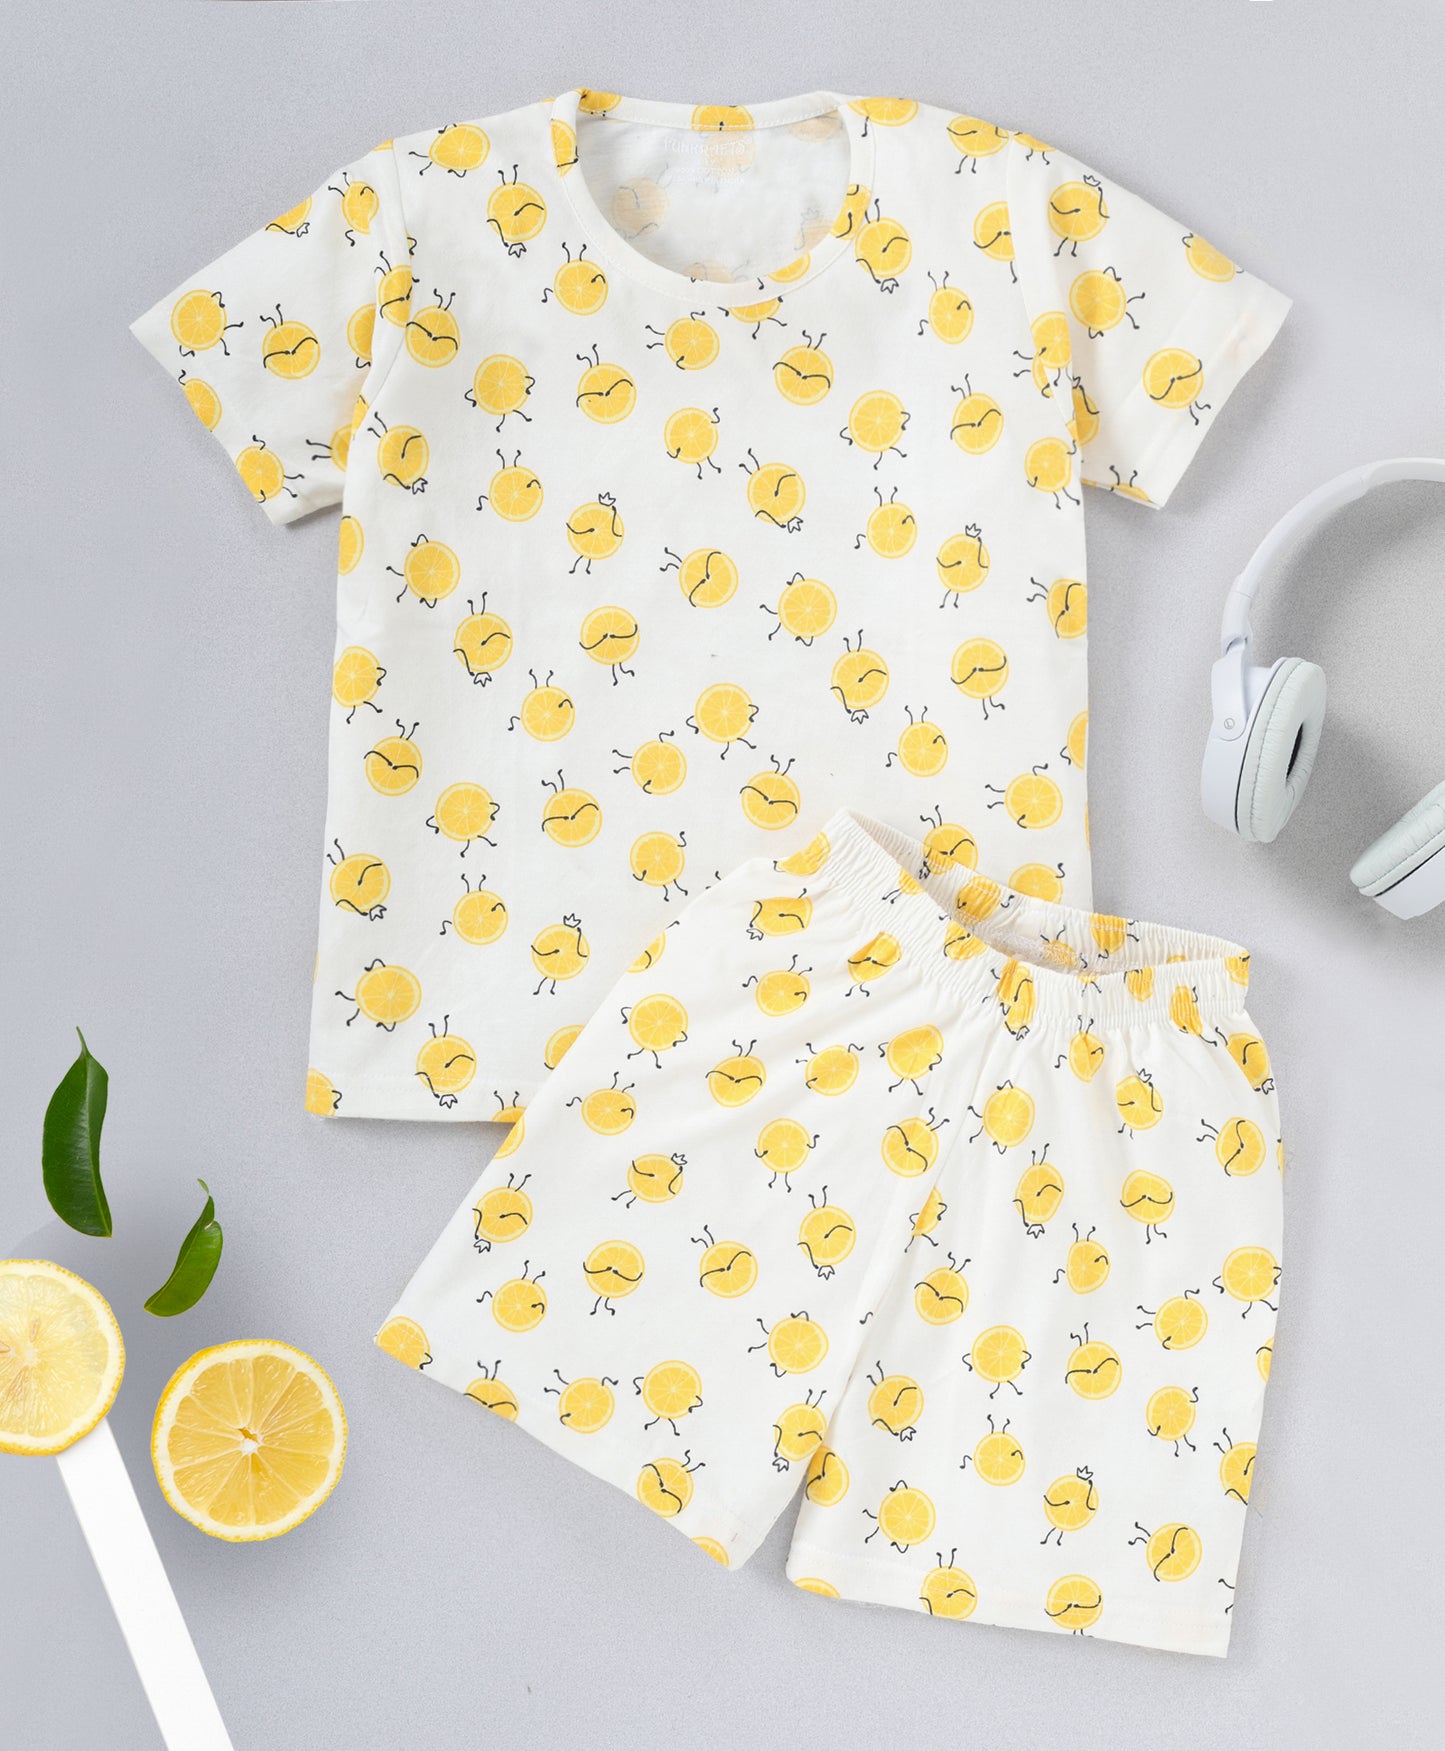 Yellow & Black Pure Cotton Half Sleeves Lemon & Puppy Printed T-shirt & Shorts Set for Boys & Girls - Pack of 2